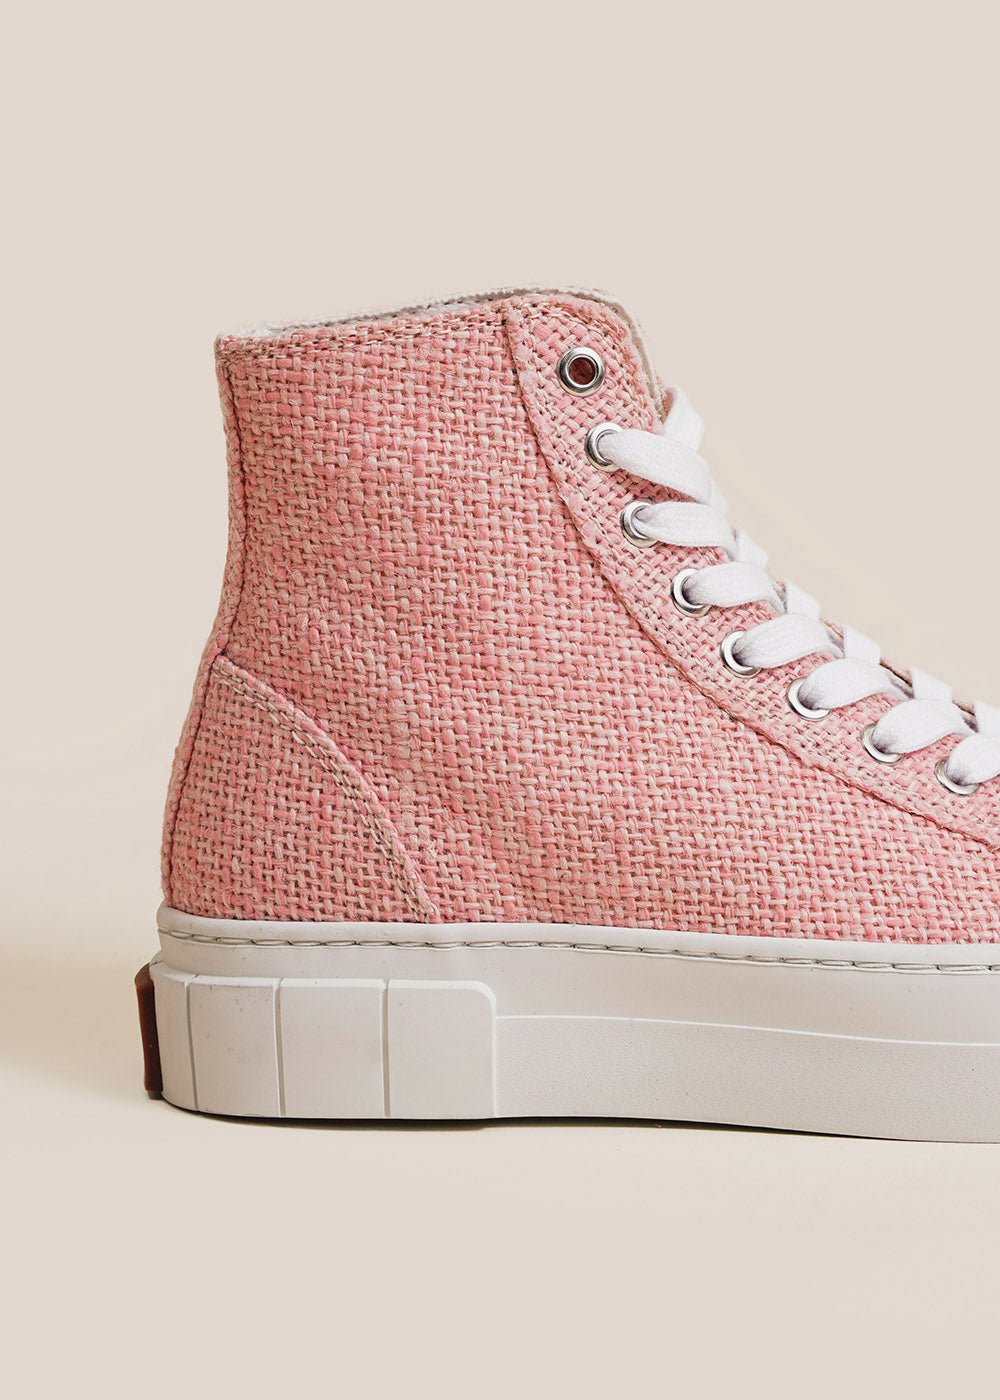 GOOD NEWS Pink Juice Sneakers - New Classics Studios Sustainable Ethical Fashion Canada